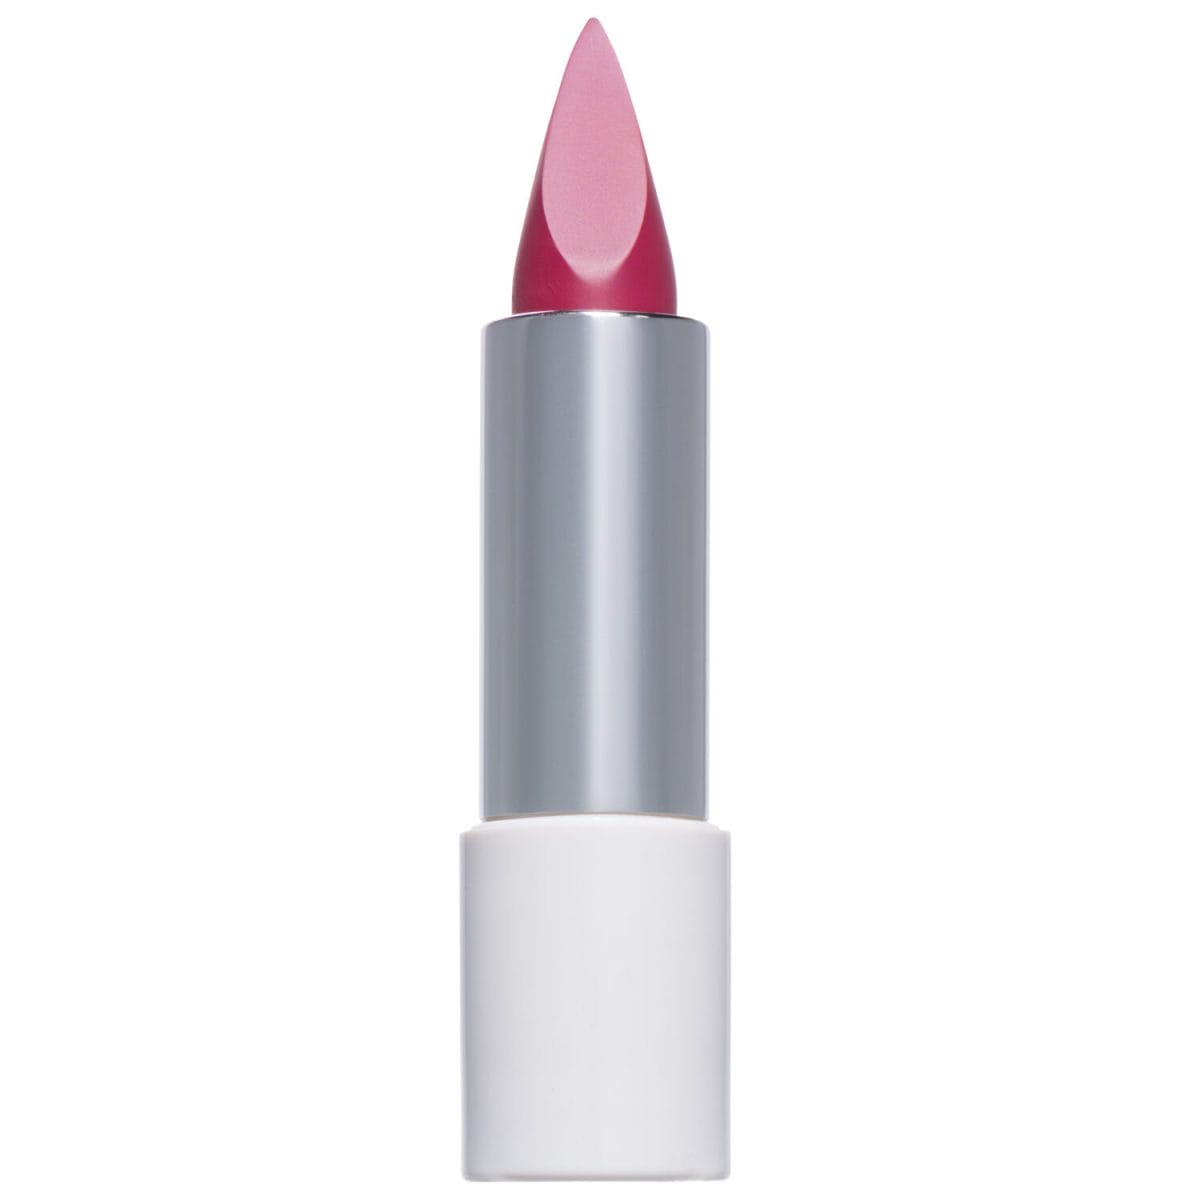 cosmetic product photo marketing image of lipstick on pure white